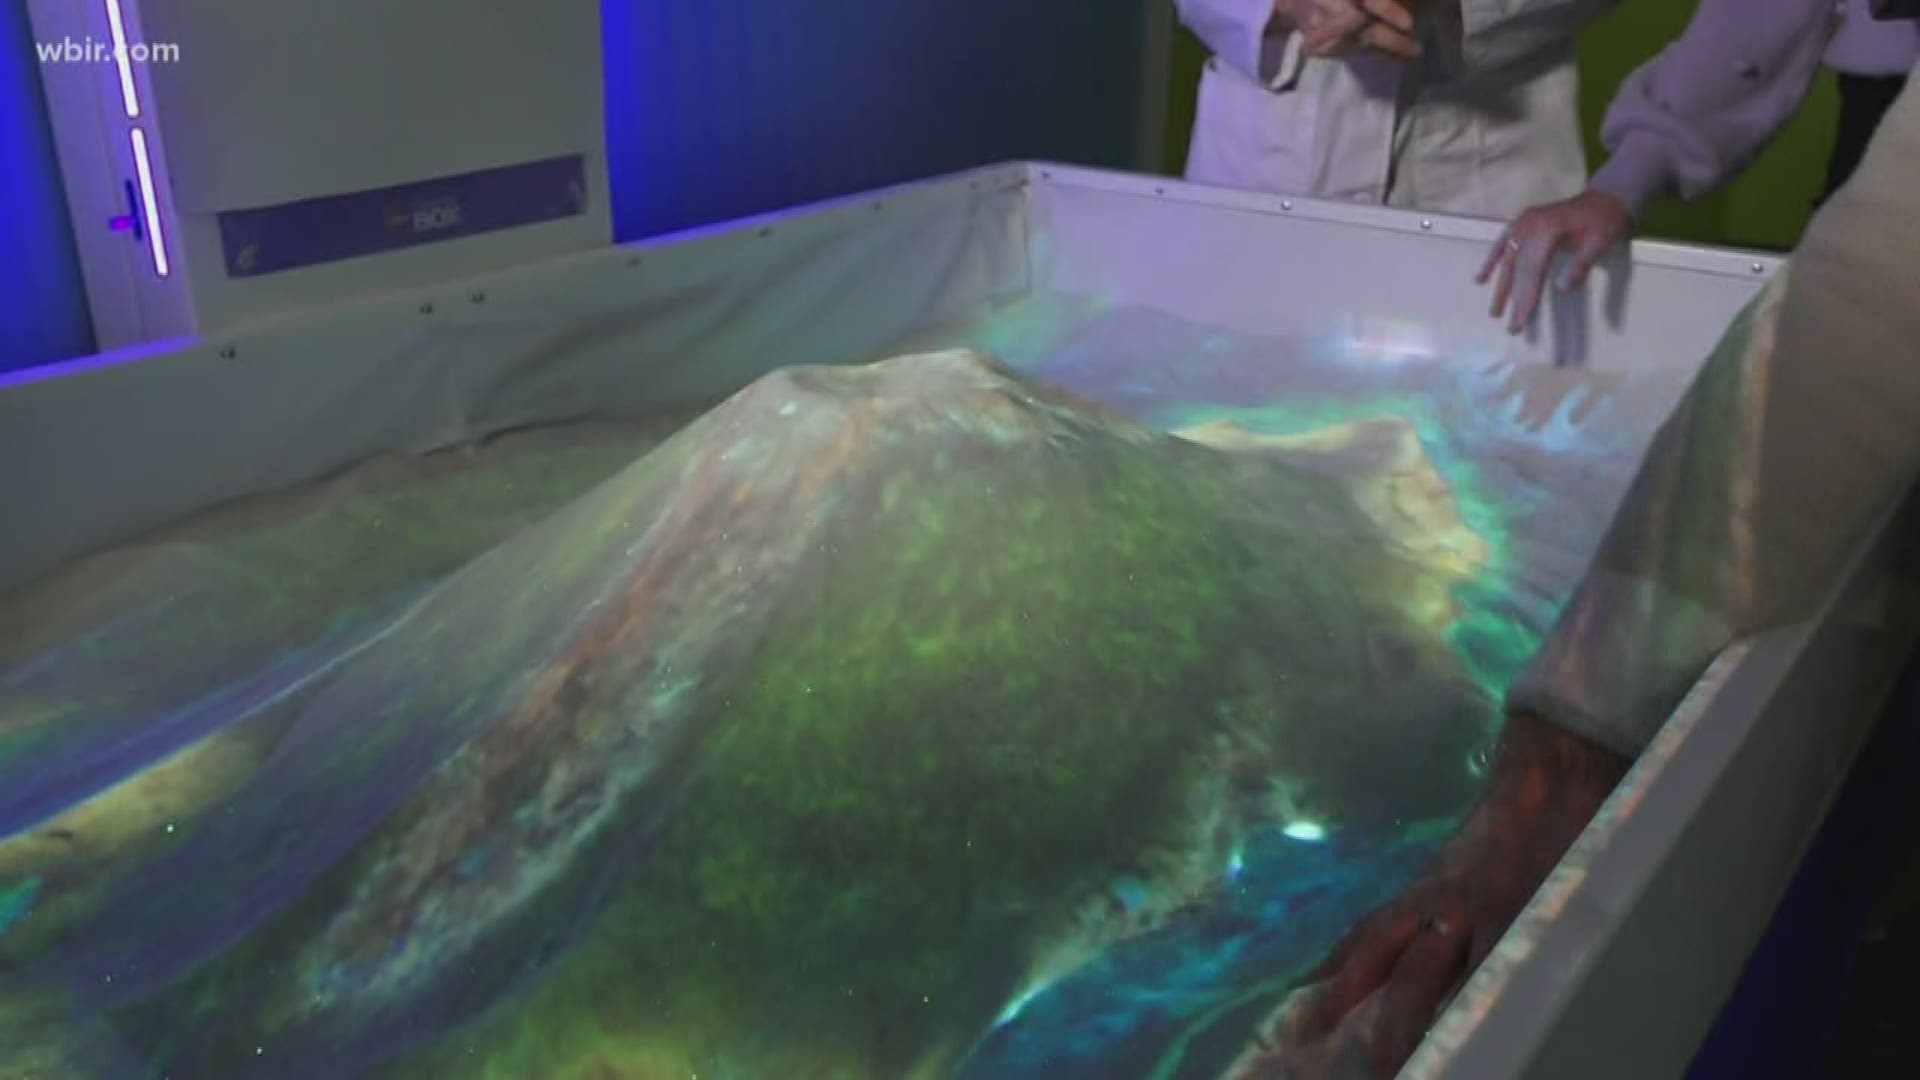 Augmented reality turns this sandbox into a hands-on teaching tool